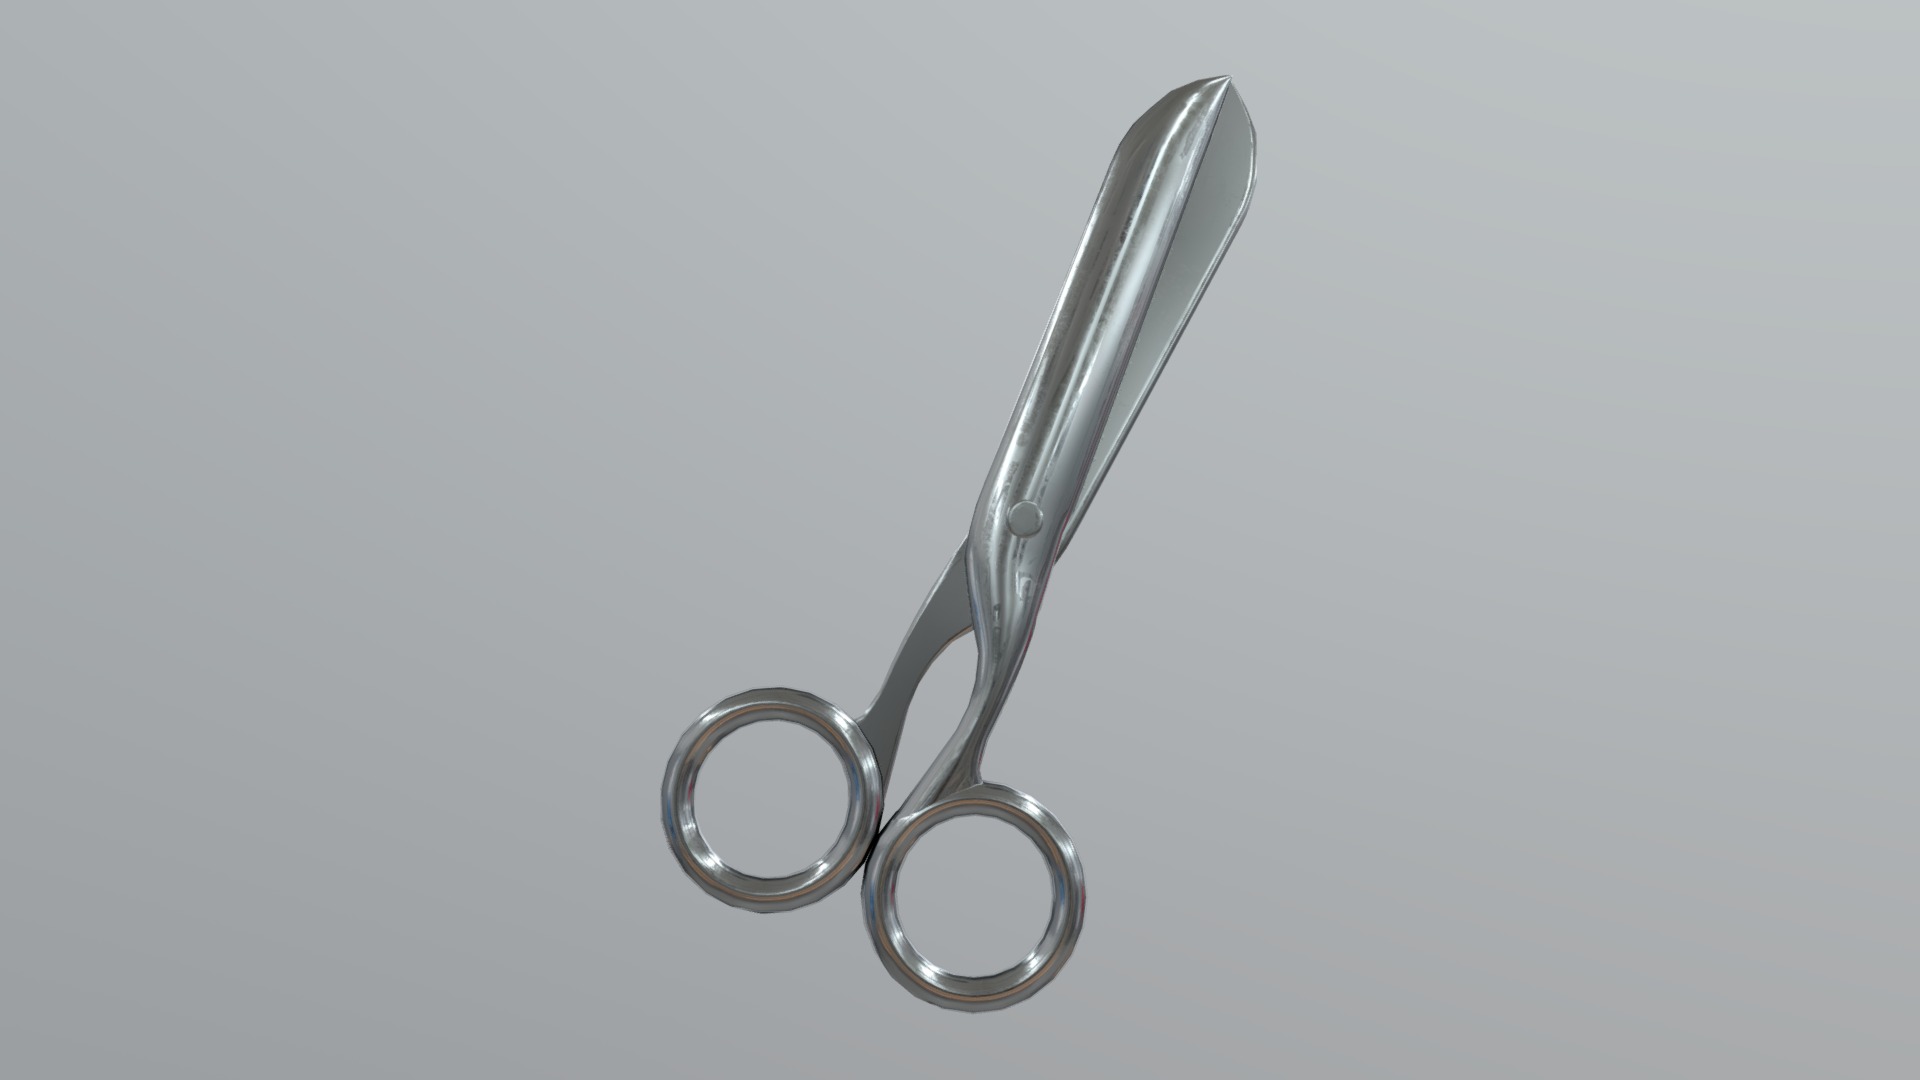 3D model Scissors 2 - This is a 3D model of the Scissors 2. The 3D model is about a silver spoon with a handle.